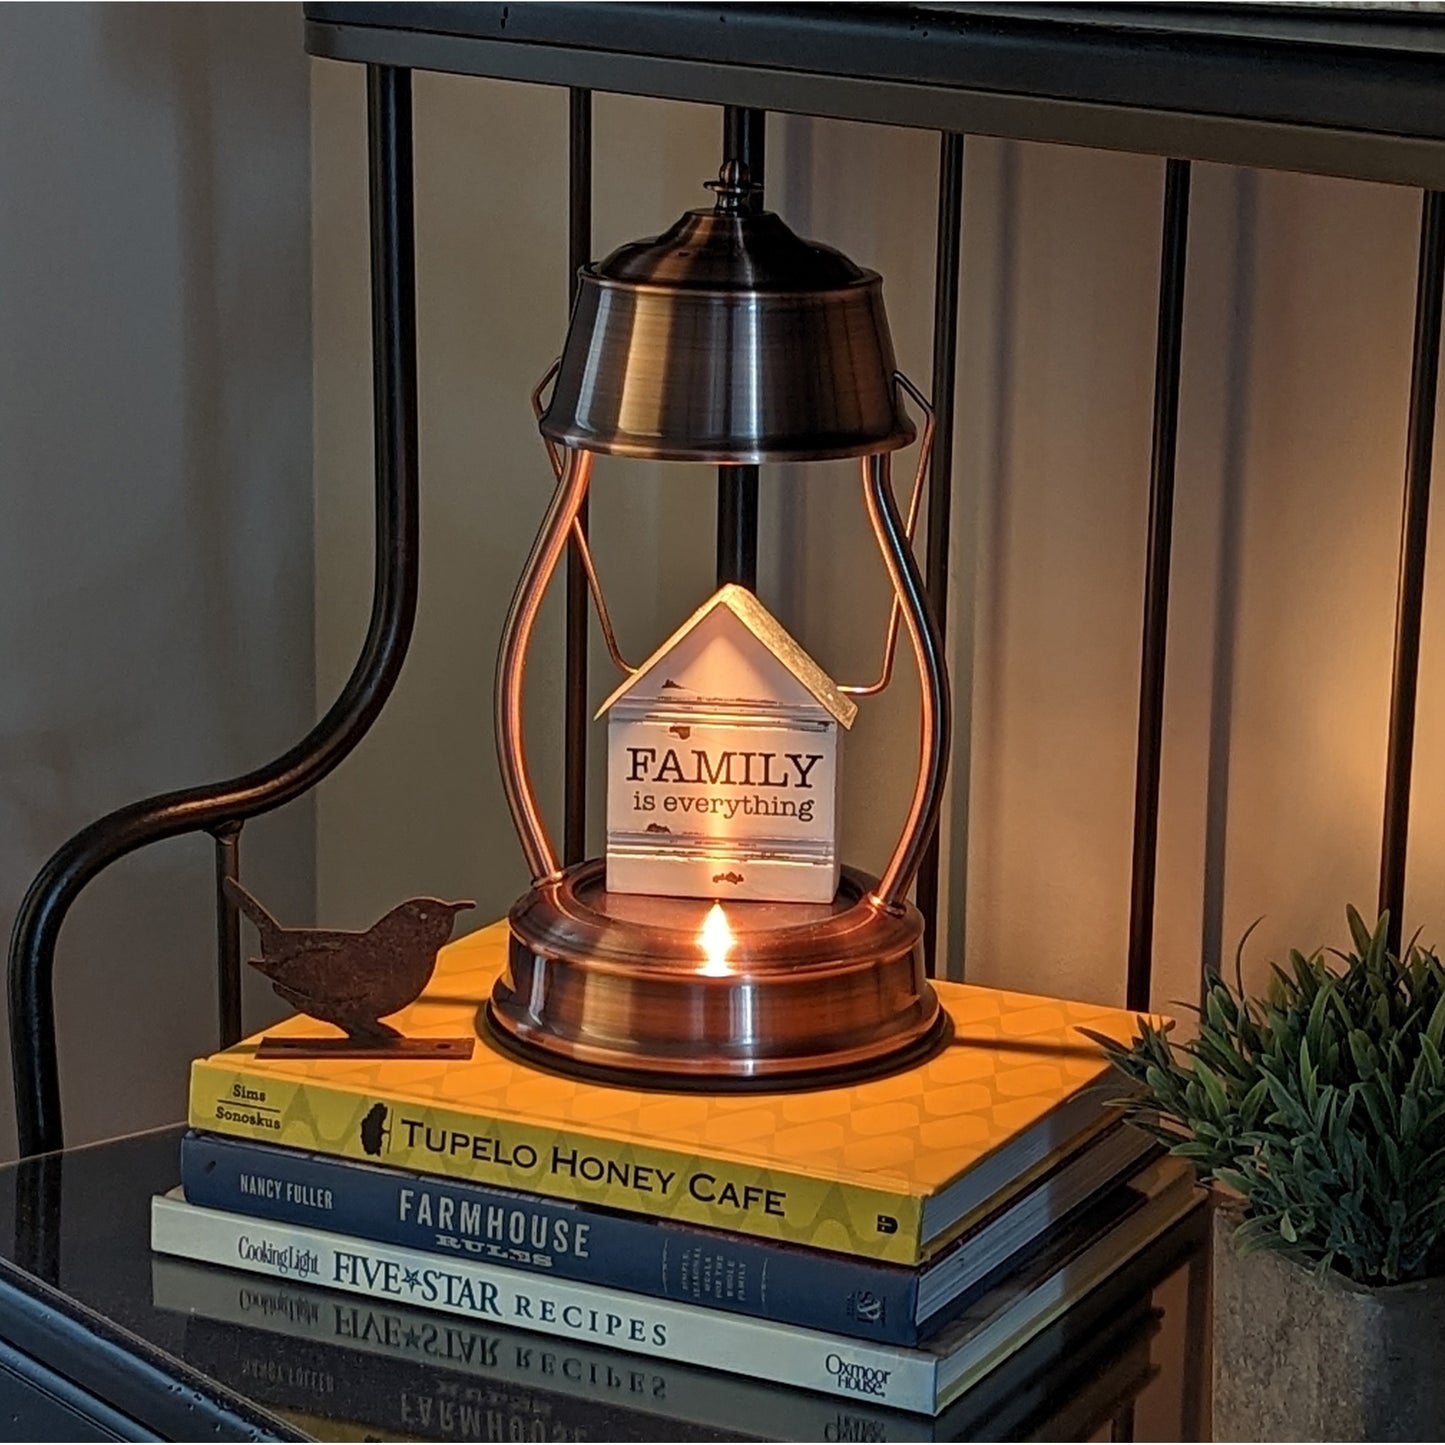 Image, lit copper candle warmer with knickknack displayed placed on shelf on top of cookbooks.